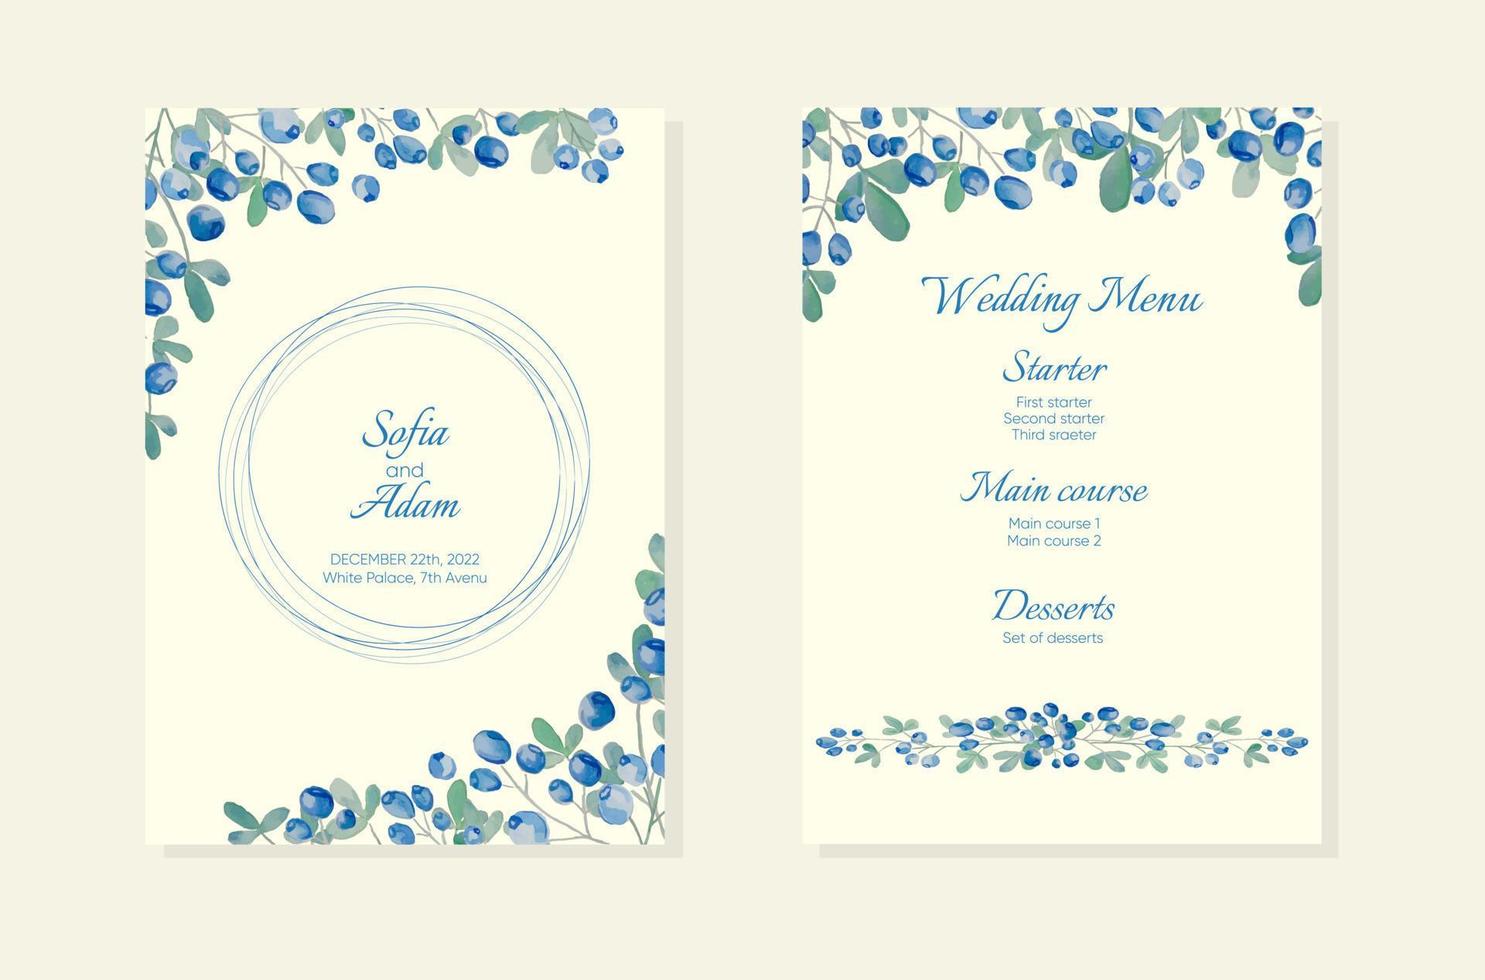 Blue derry vector frames. Hand painted branches, leaves and beeries on white background. Greenery wedding simple minimalist invitations.